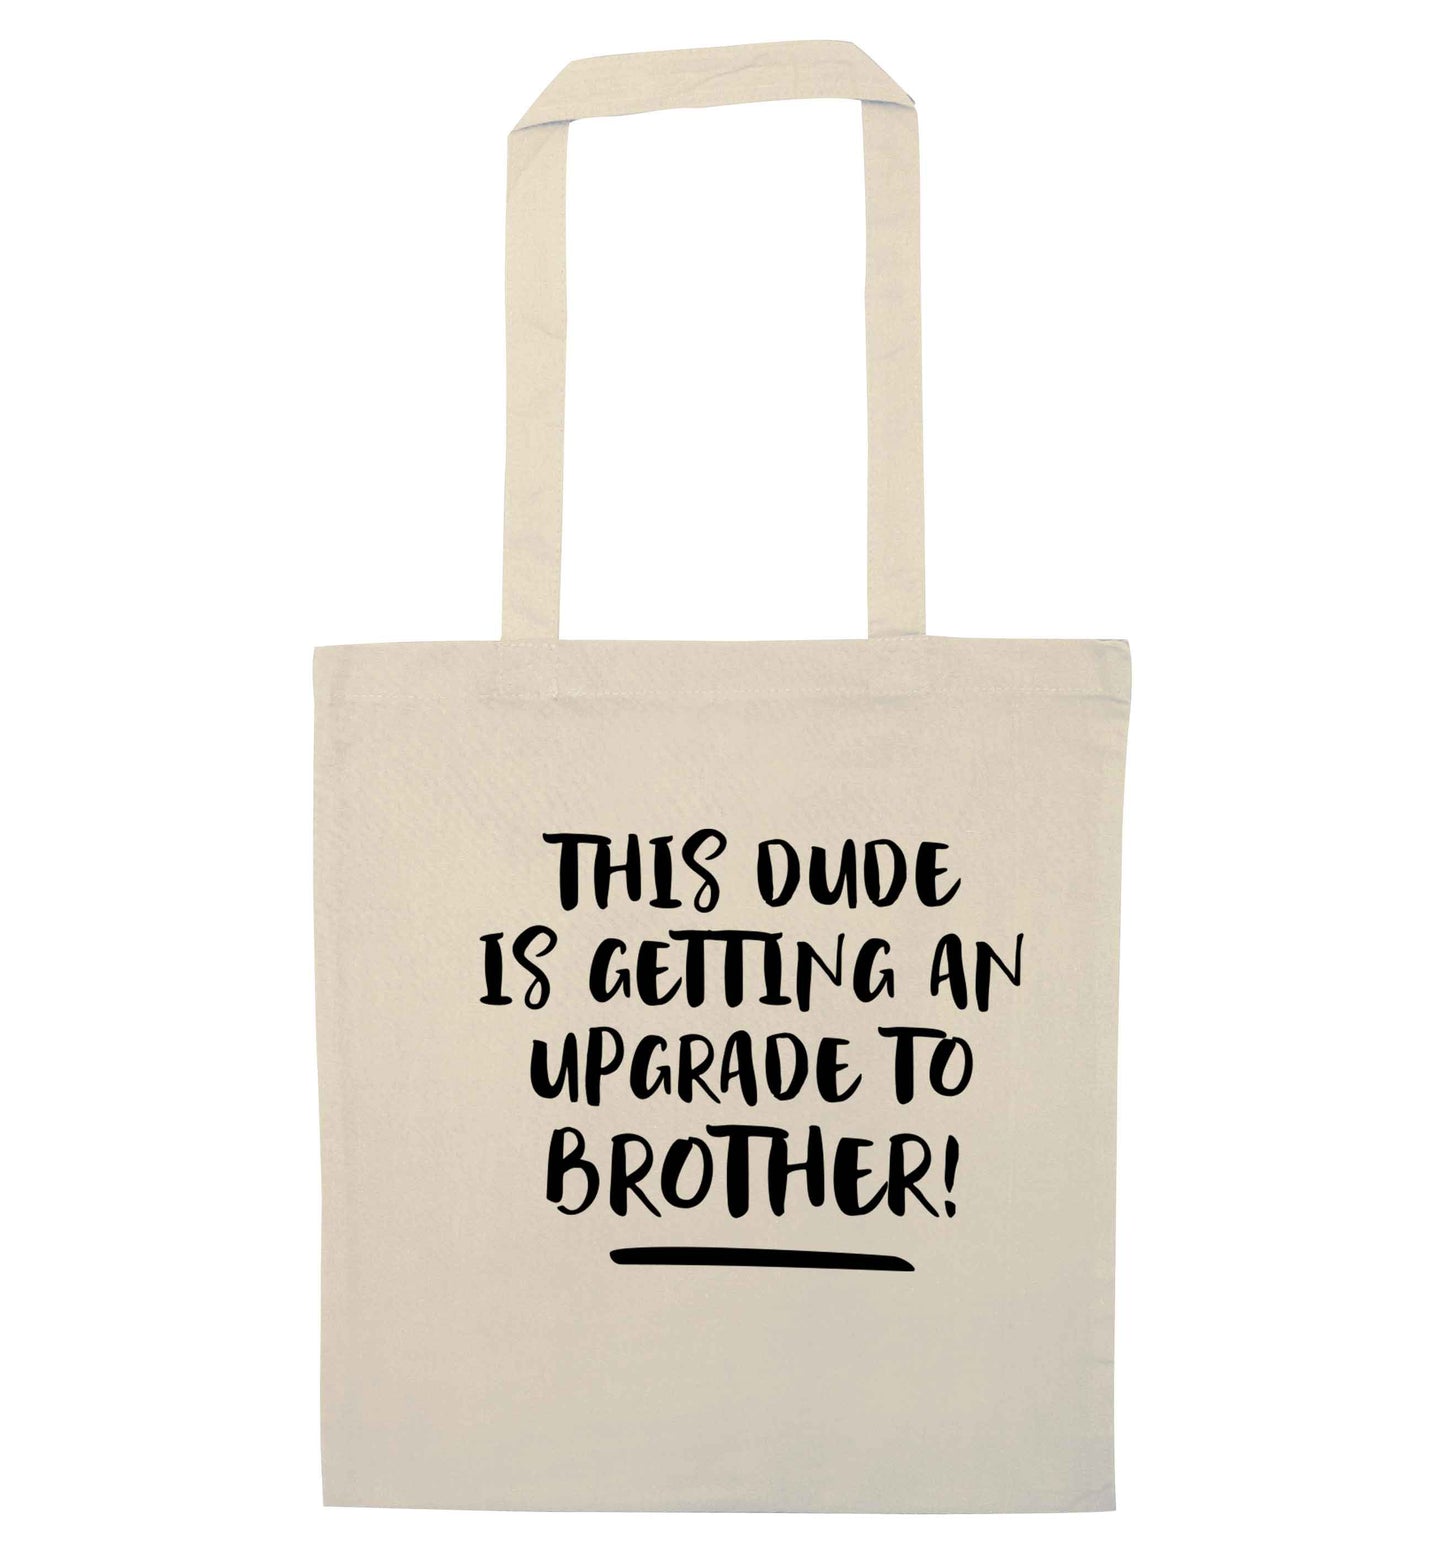 This dude is getting an upgrade to brother! natural tote bag